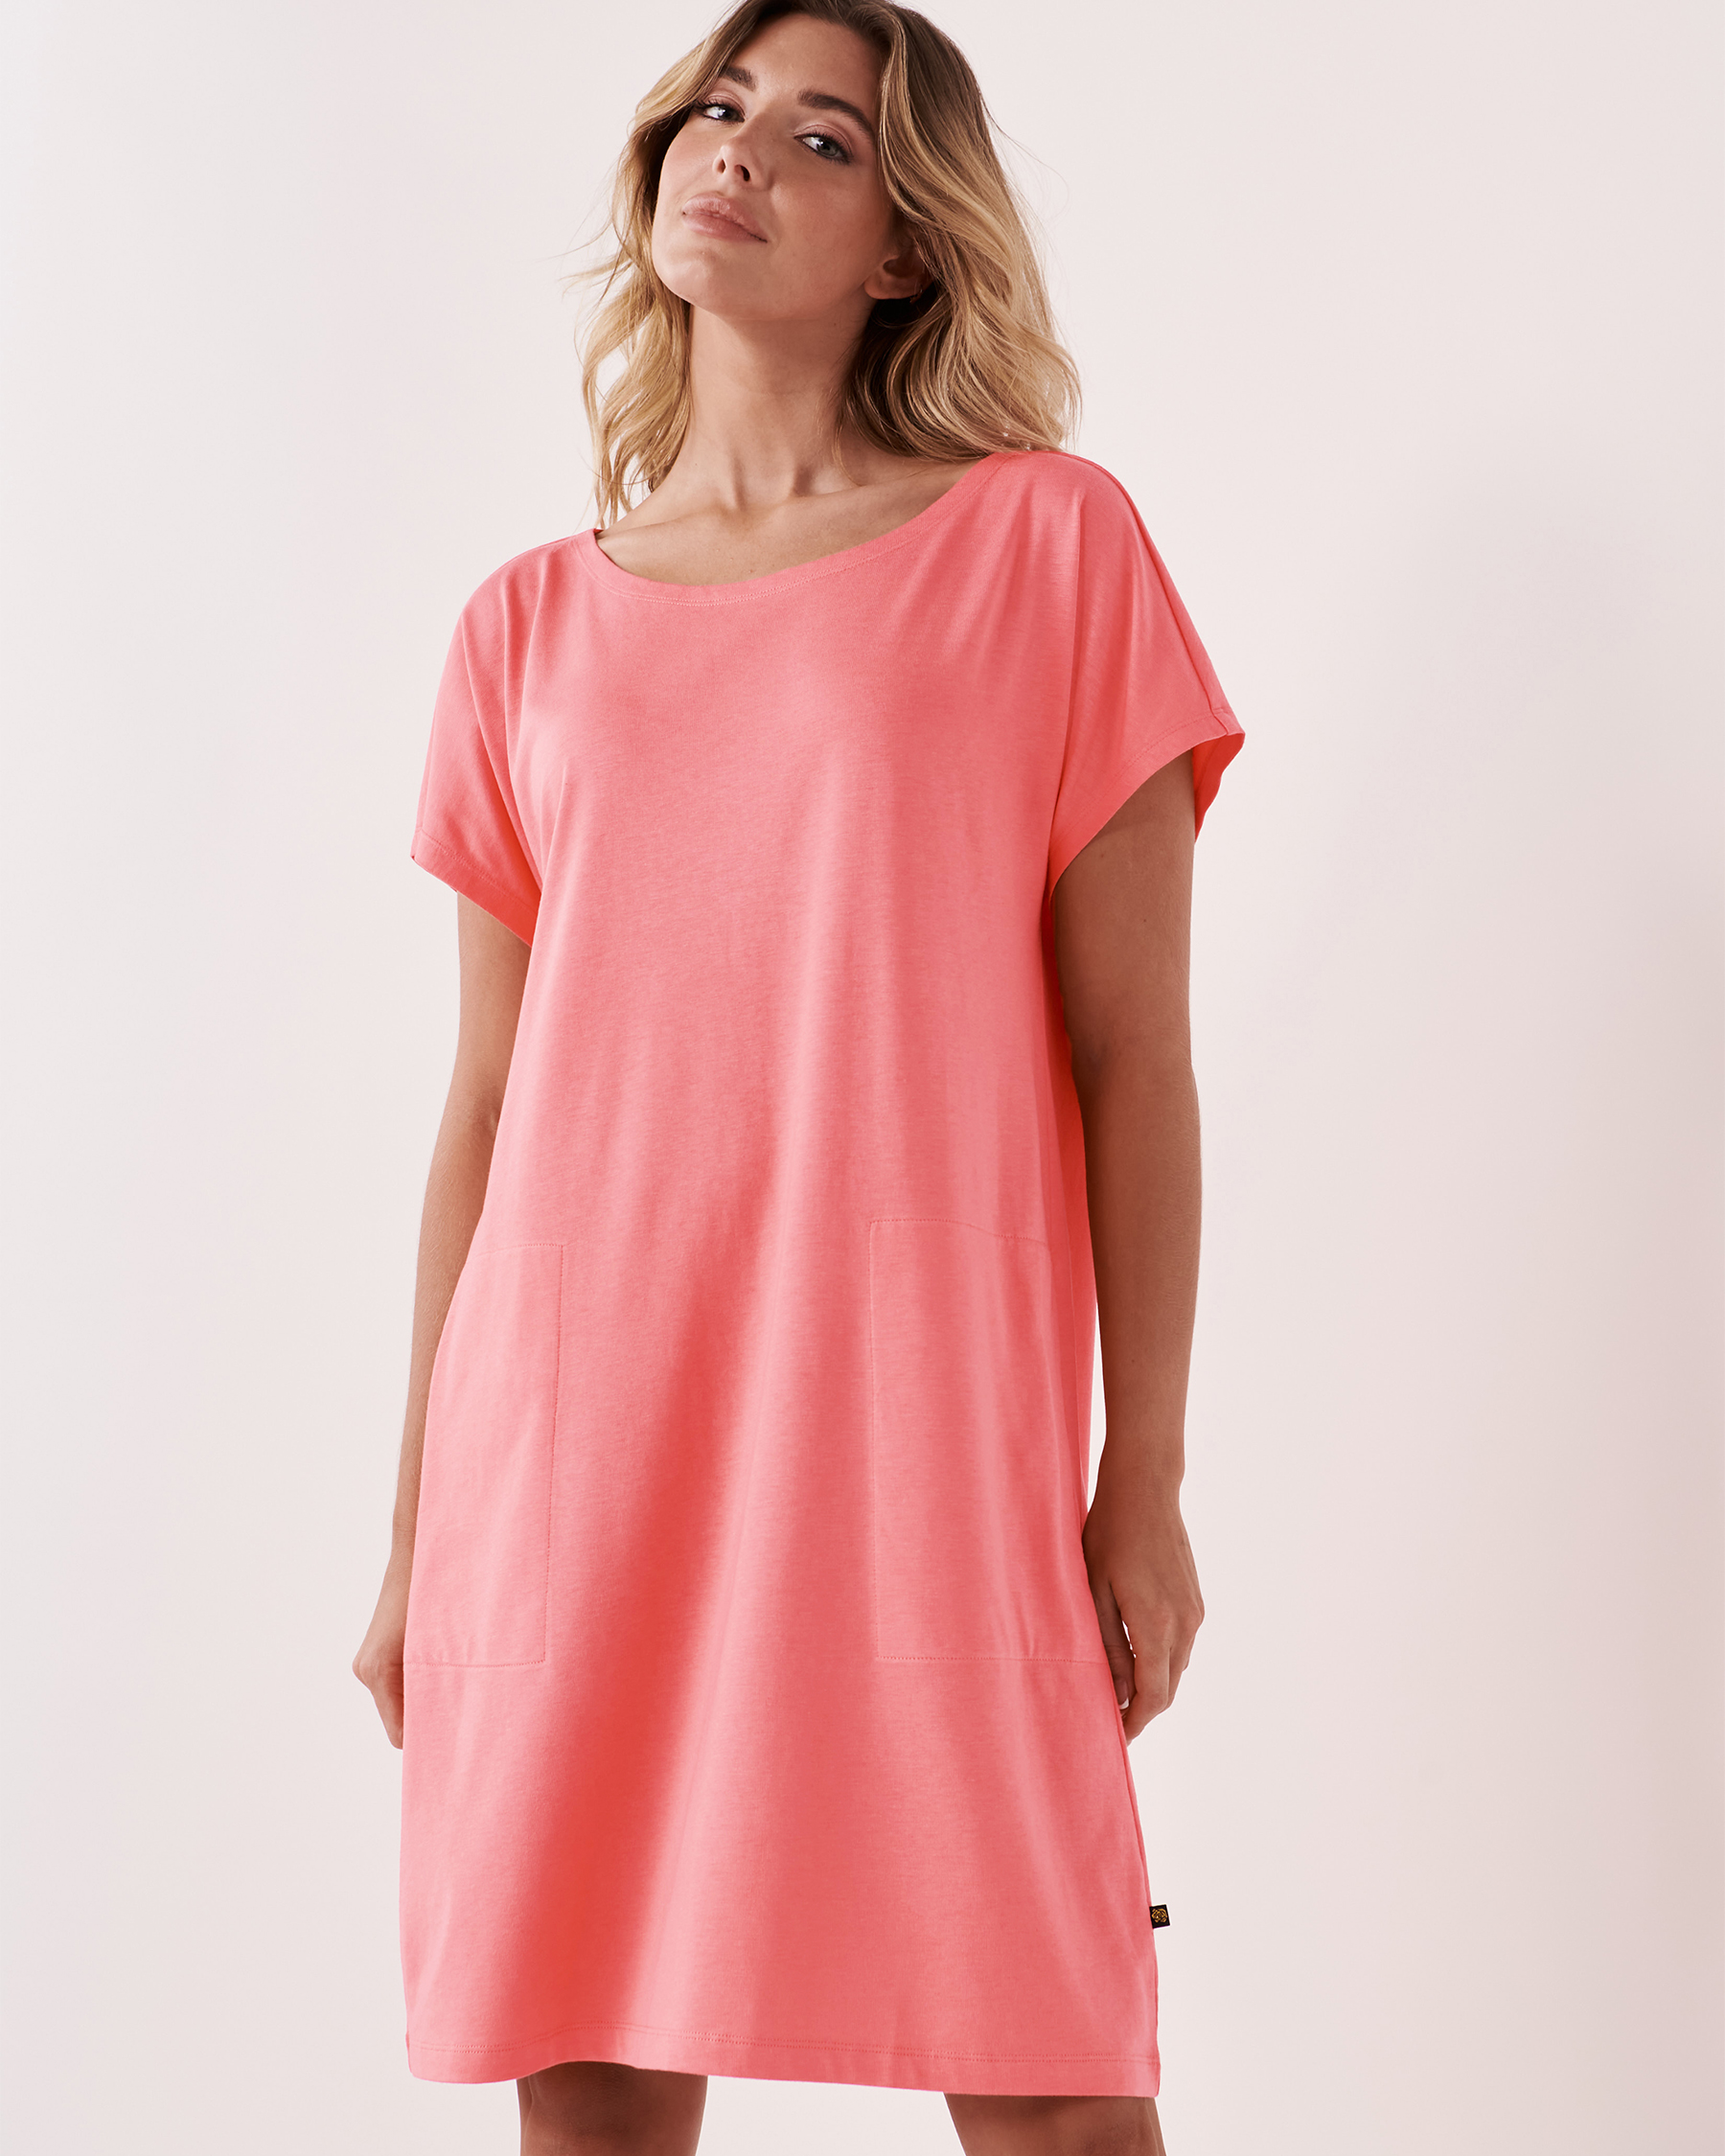 AQUAROSE Short Sleeve Dress with Pockets Shell pink 80300046 - View4